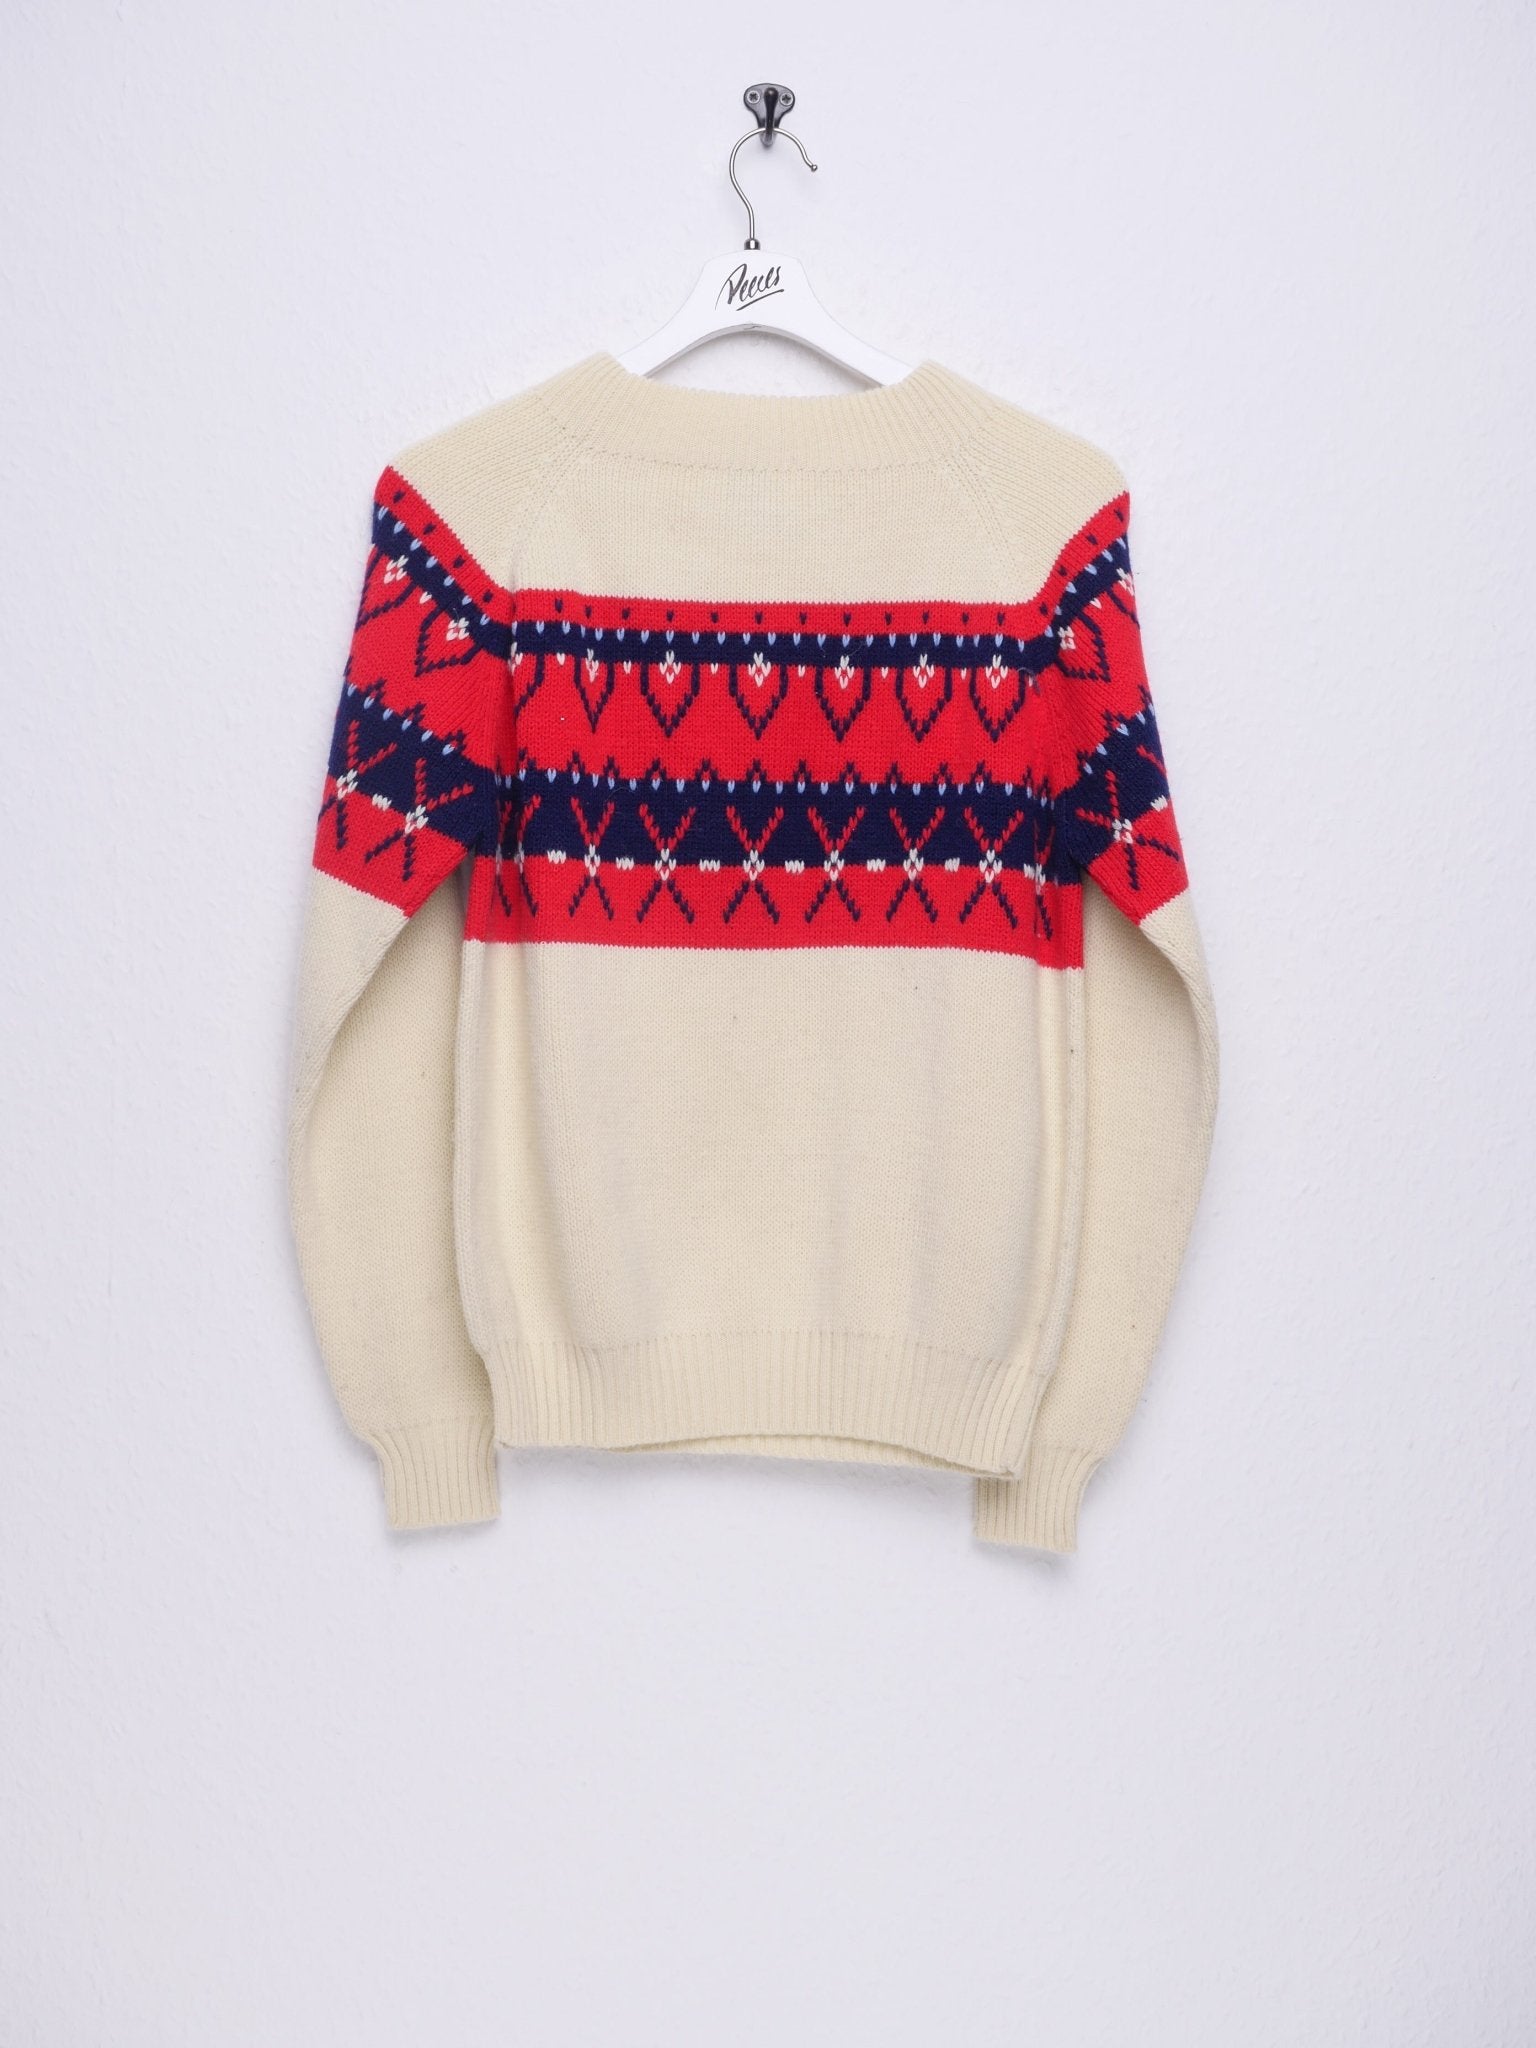 Vintage patterned knitted Sweater - Peeces